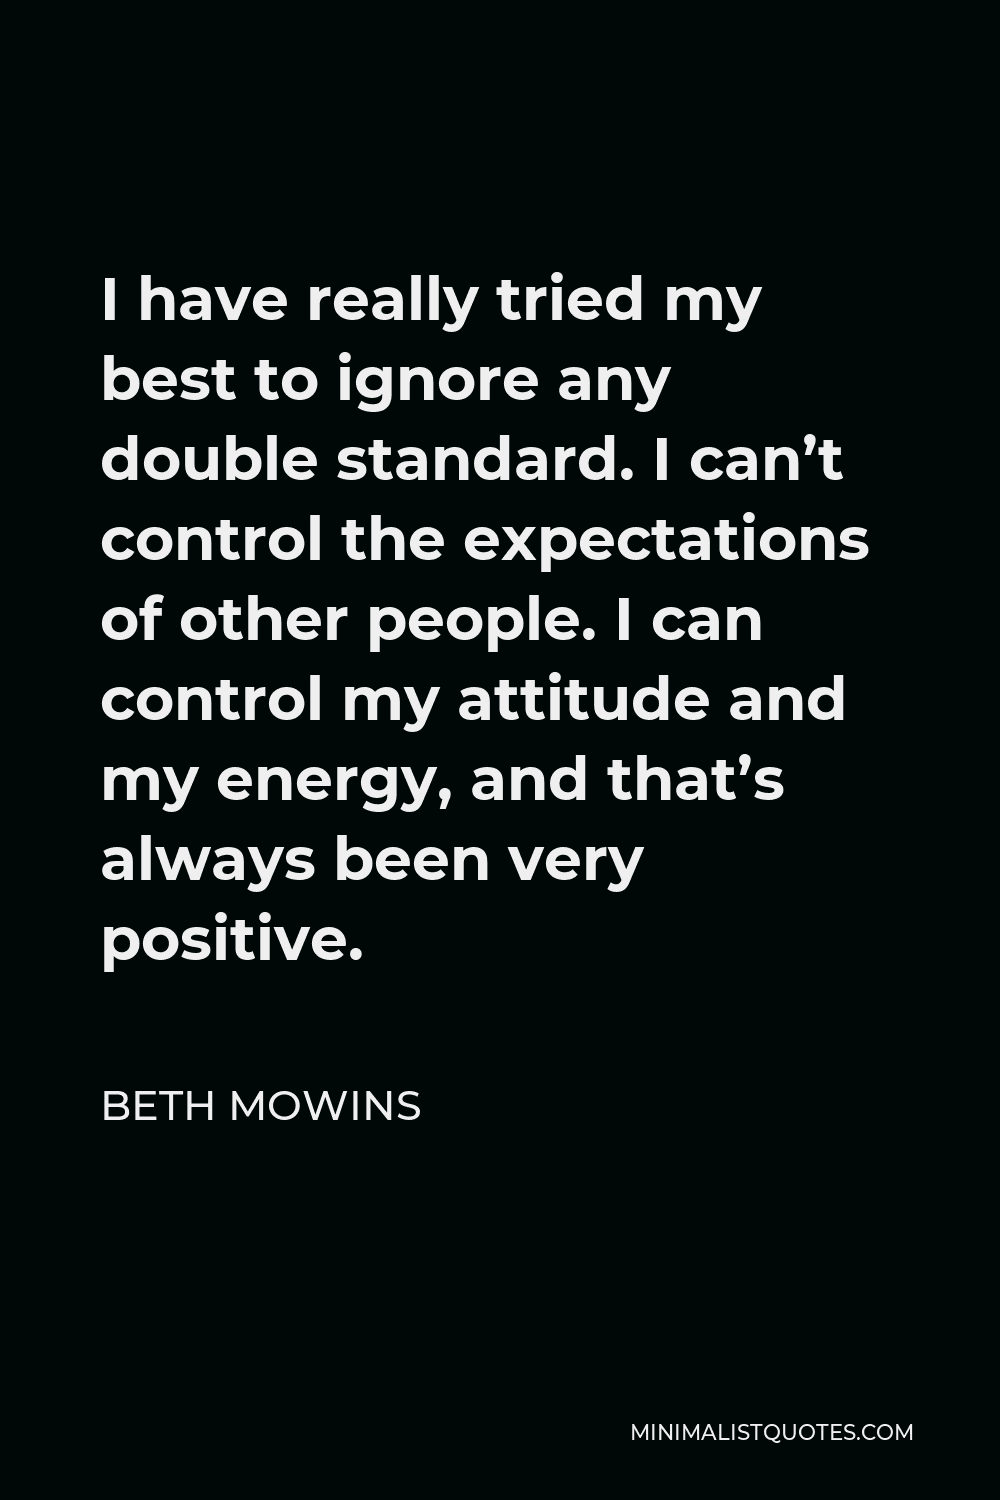 Beth Mowins Quote - I have really tried my best to ignore any double standard. I can’t control the expectations of other people. I can control my attitude and my energy, and that’s always been very positive.